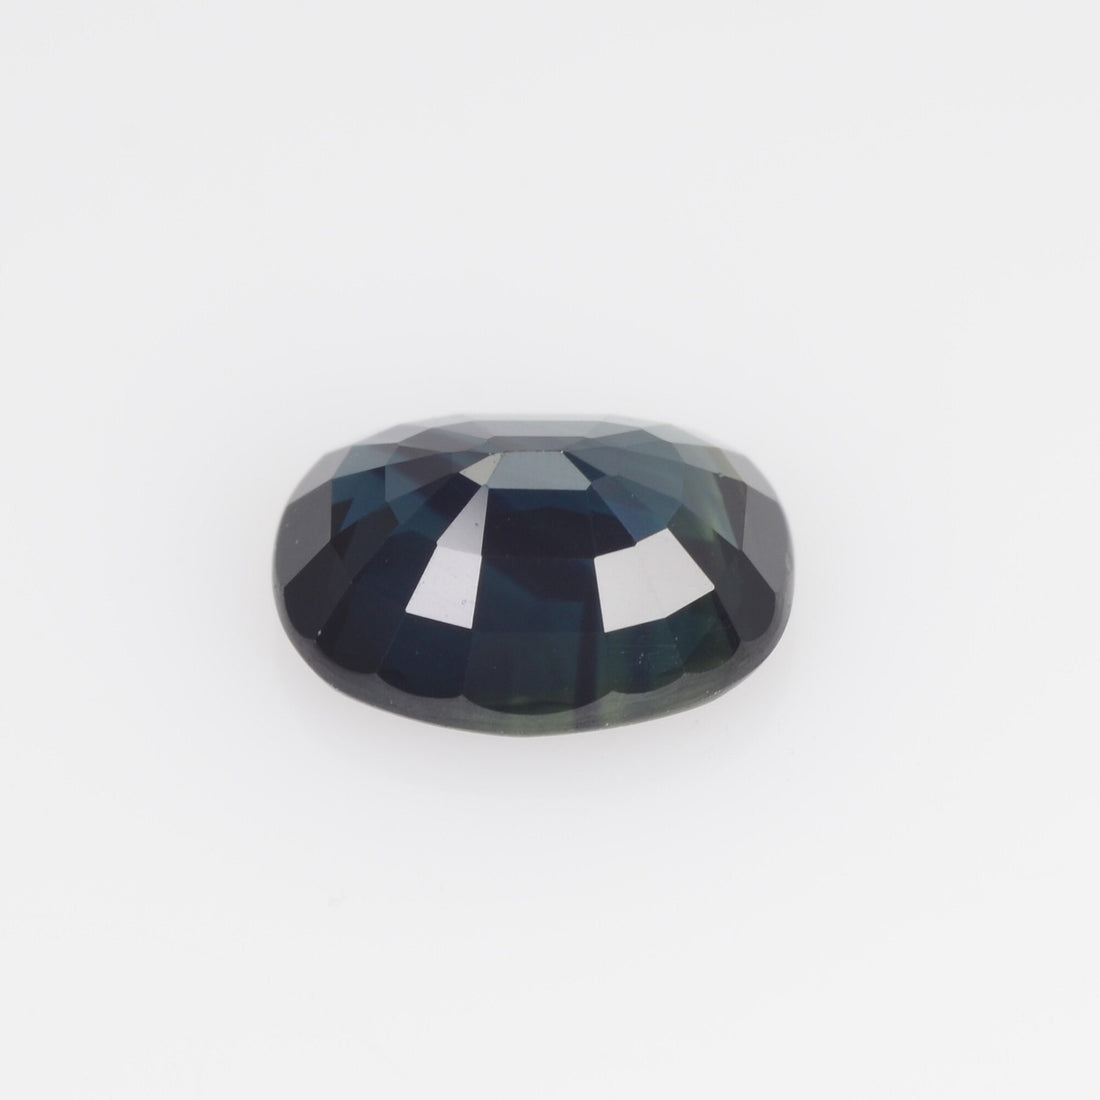 0.97-1.03 Cts Natural Blue Sapphire Loose Gemstone Oval Cut